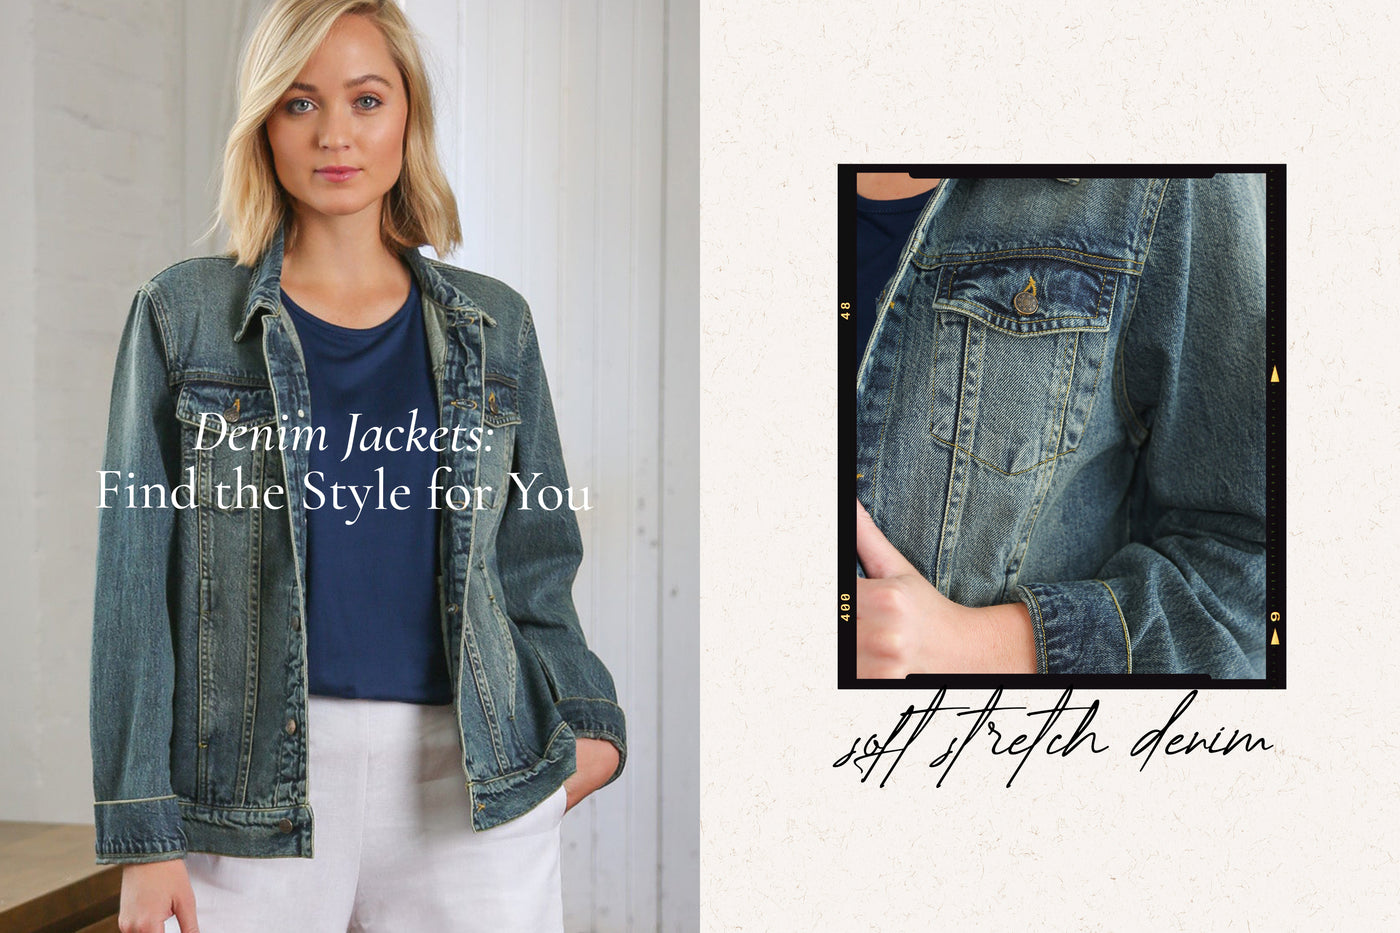 Denim Jackets: Find the Style for You